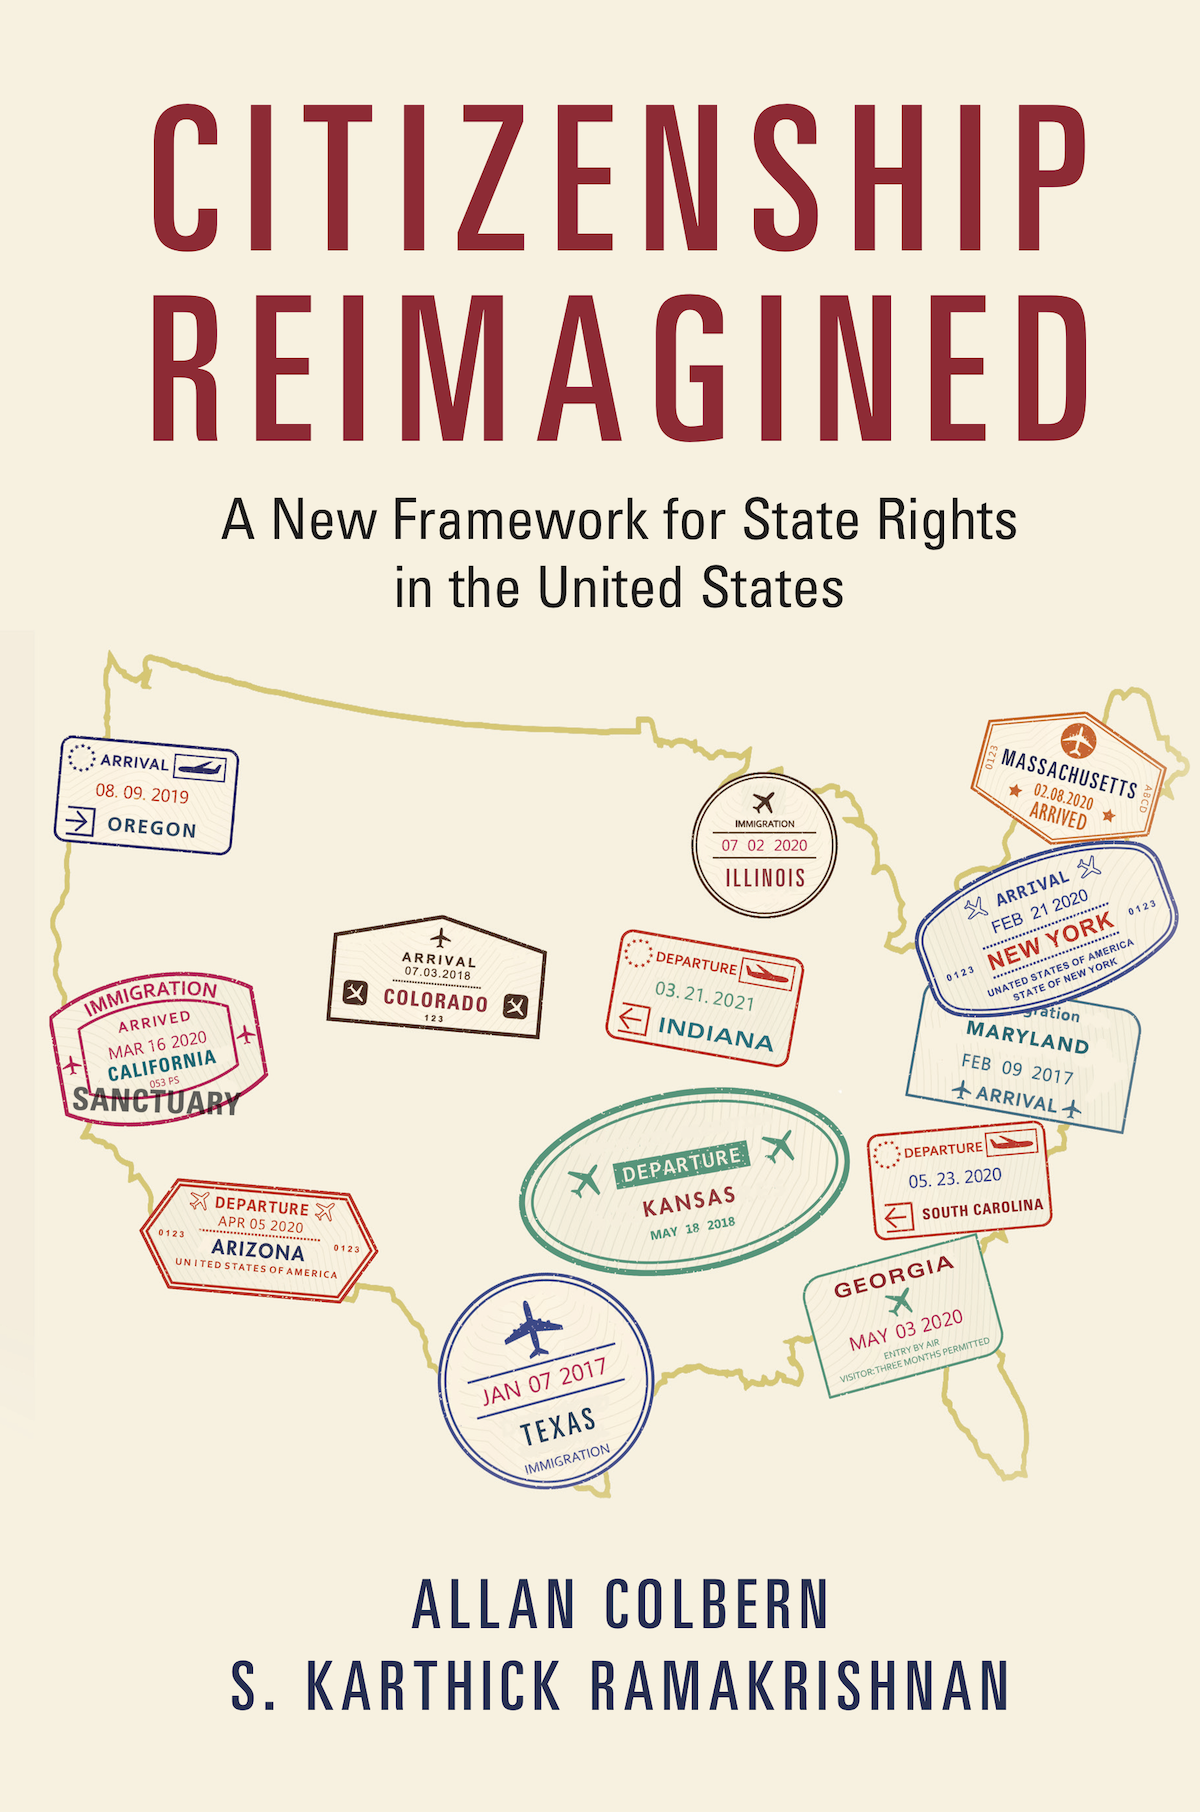 The Book Citizenship Reimagined